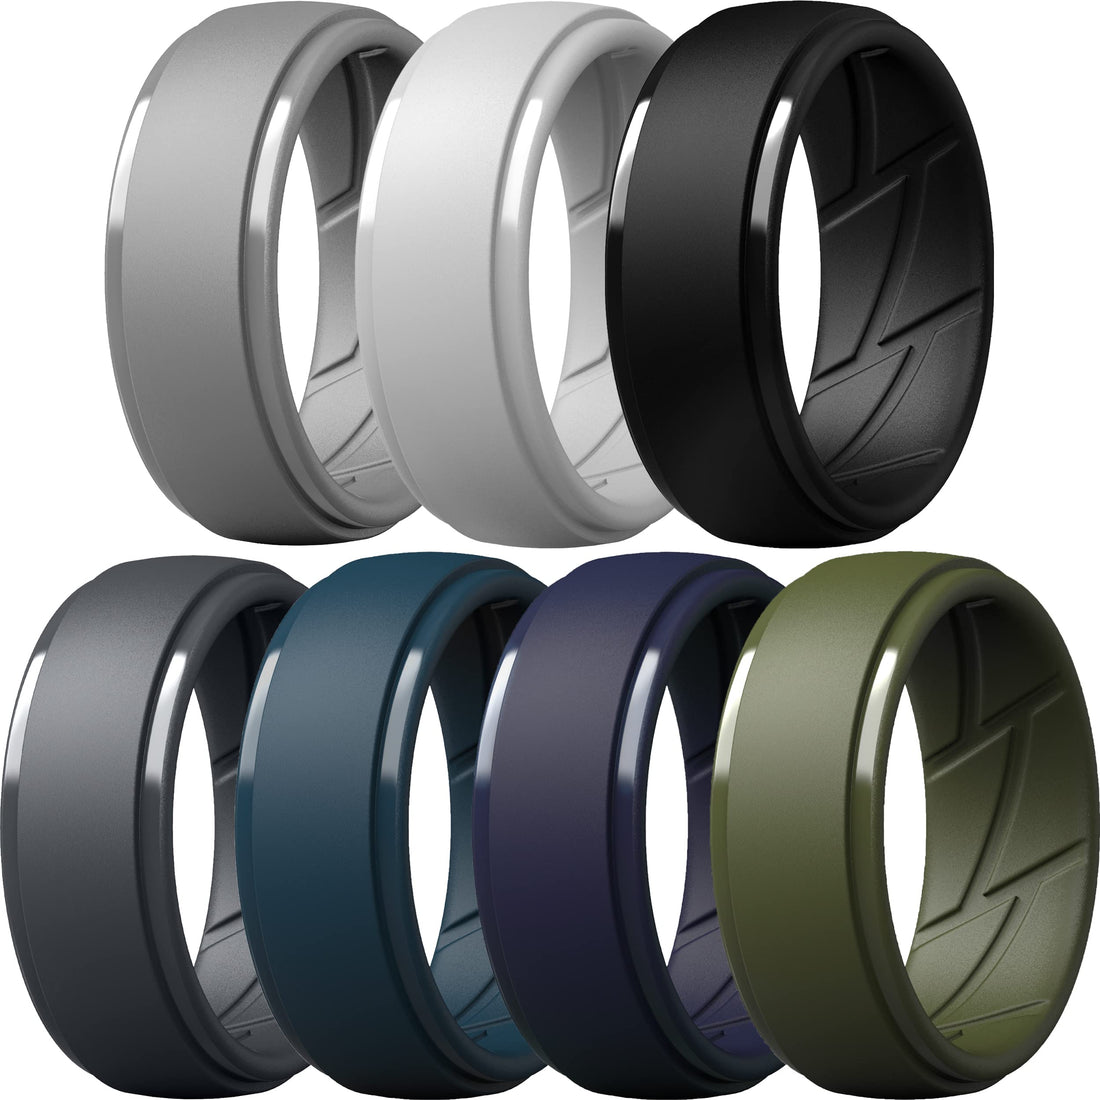 ThunderFit Silicone Rings for Men, Breathable Air Flow Grooves Rubber Wedding Bands 10mm Wide 2.5mm Thick - ...